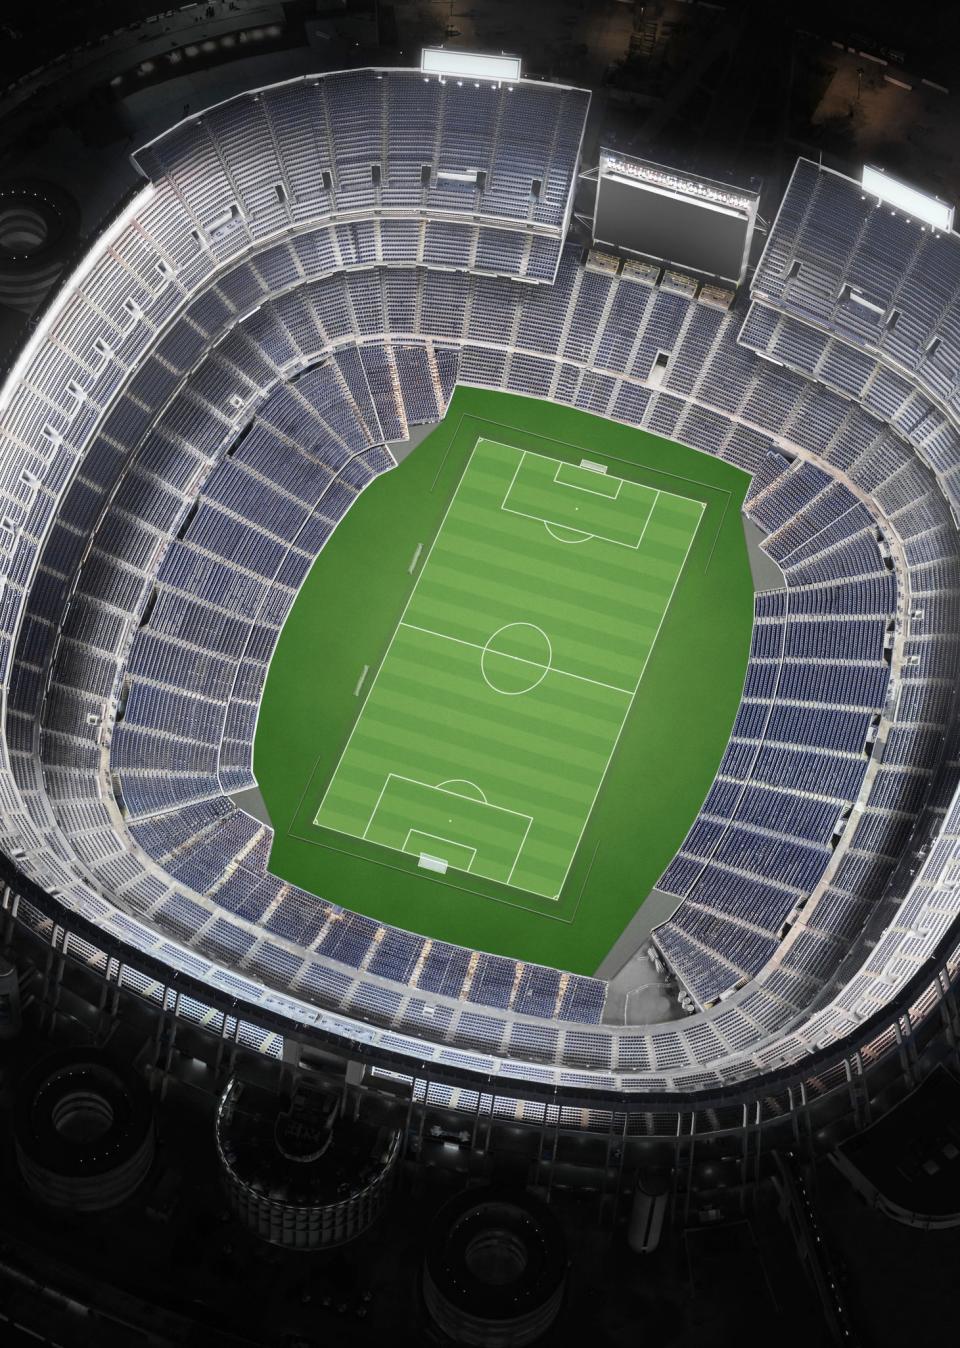 View of a football stadium from above.